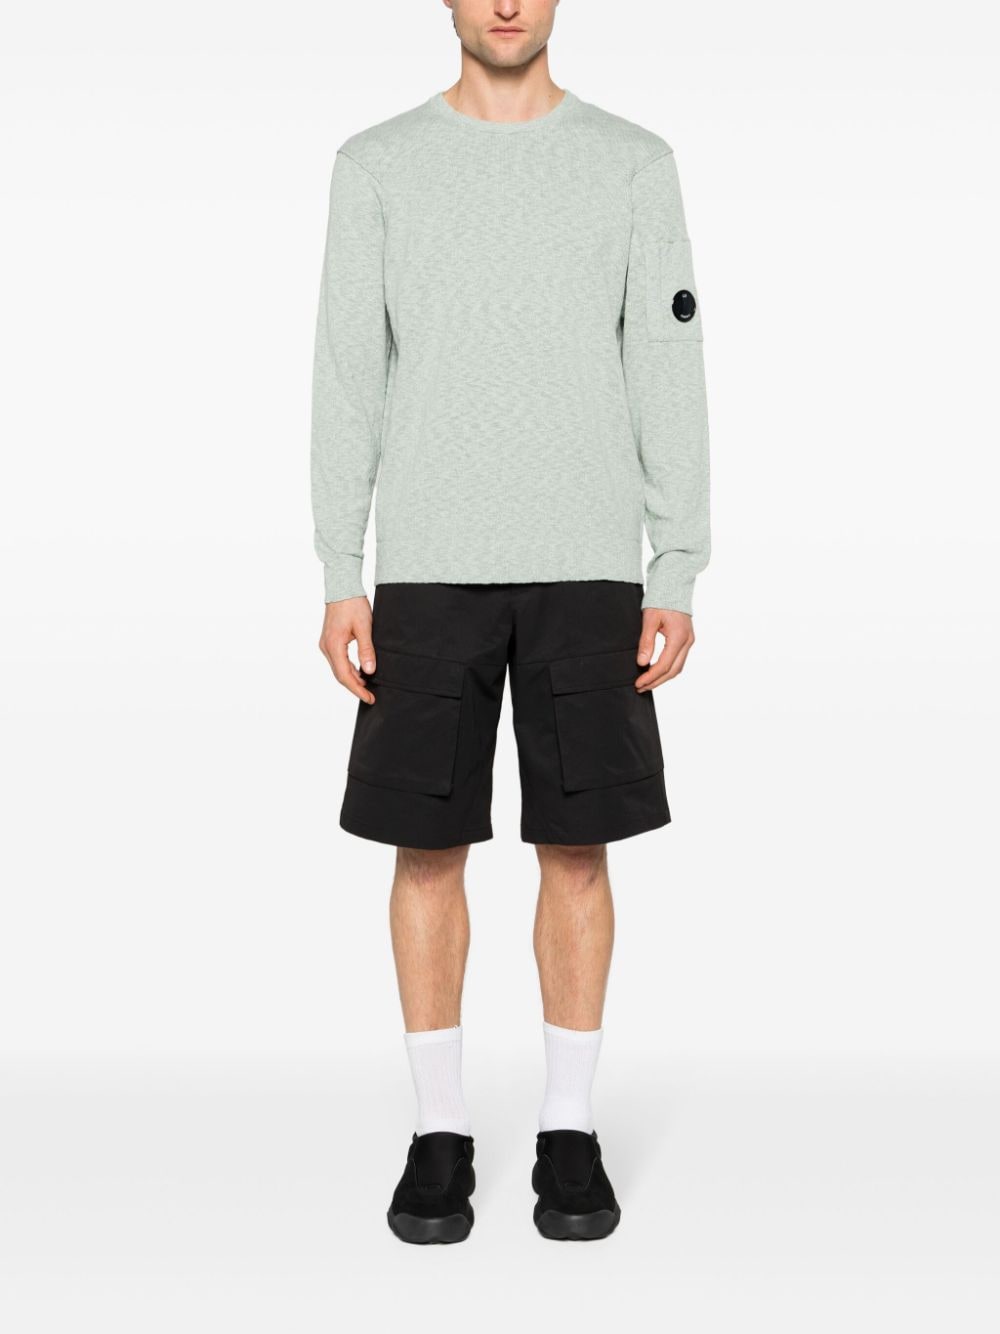 C.P. Company mélange-effect knitted jumper - Groen